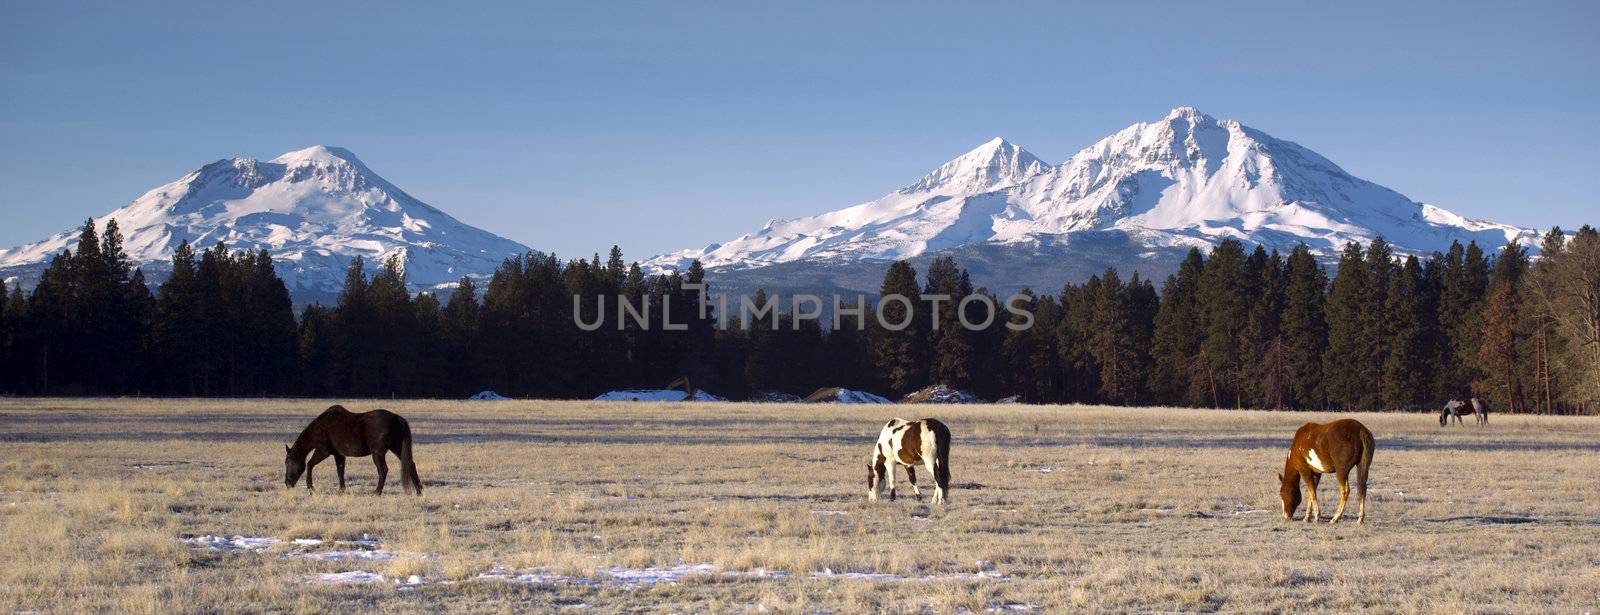 Horse Ranch at the Base of Three Sisters Mountains Oregon